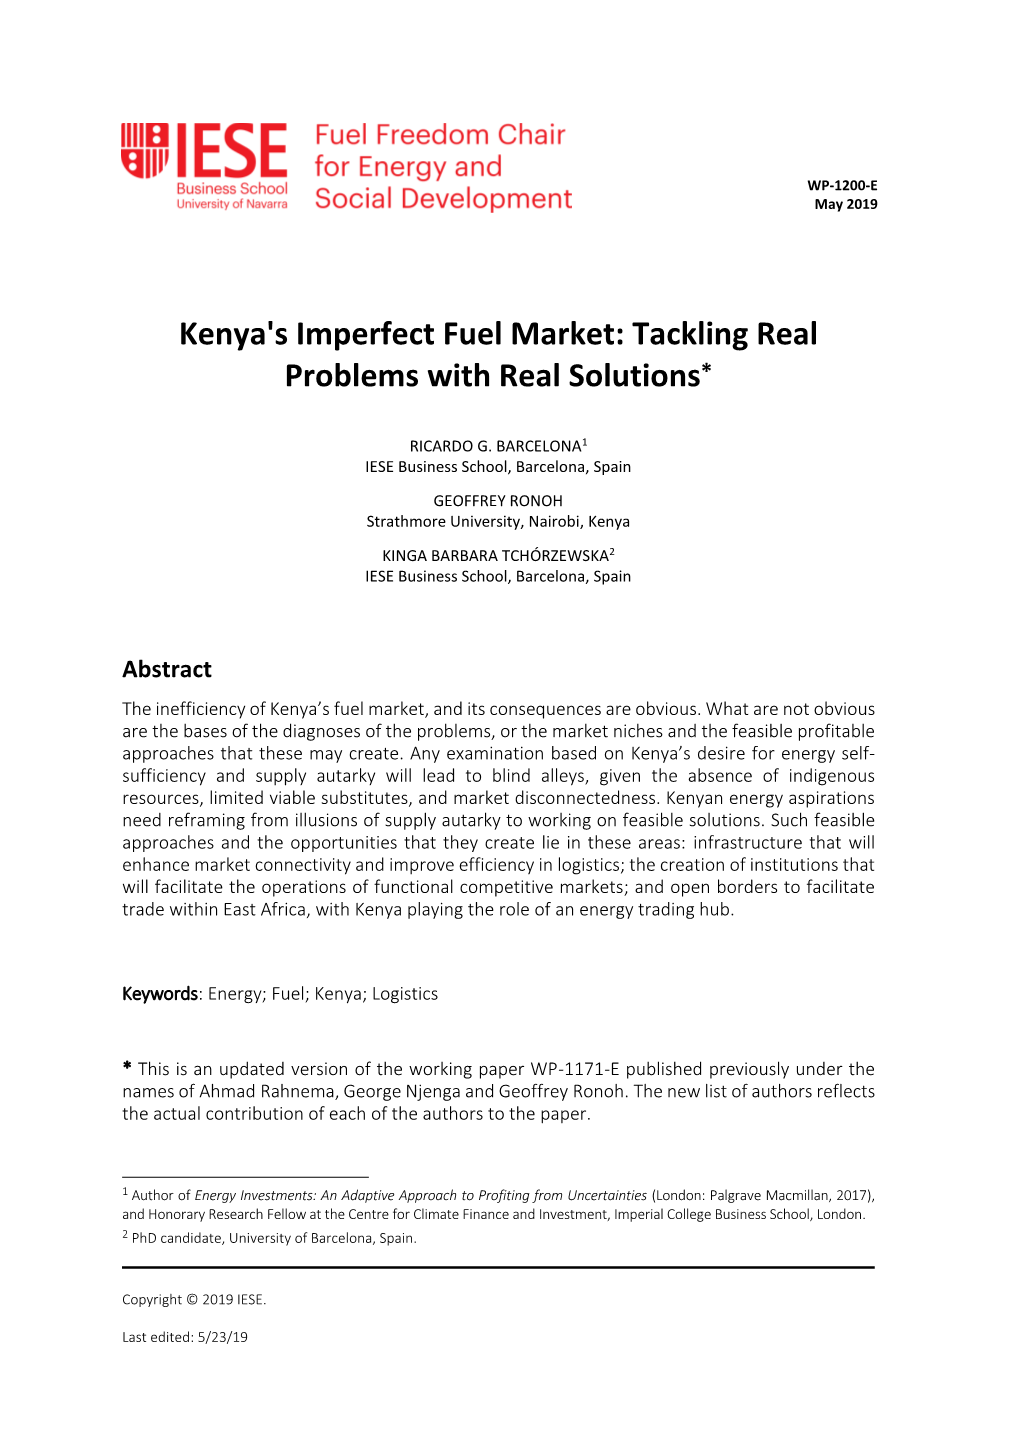 Kenya's Imperfect Fuel Market: Tackling Real Problems with Real Solutions*